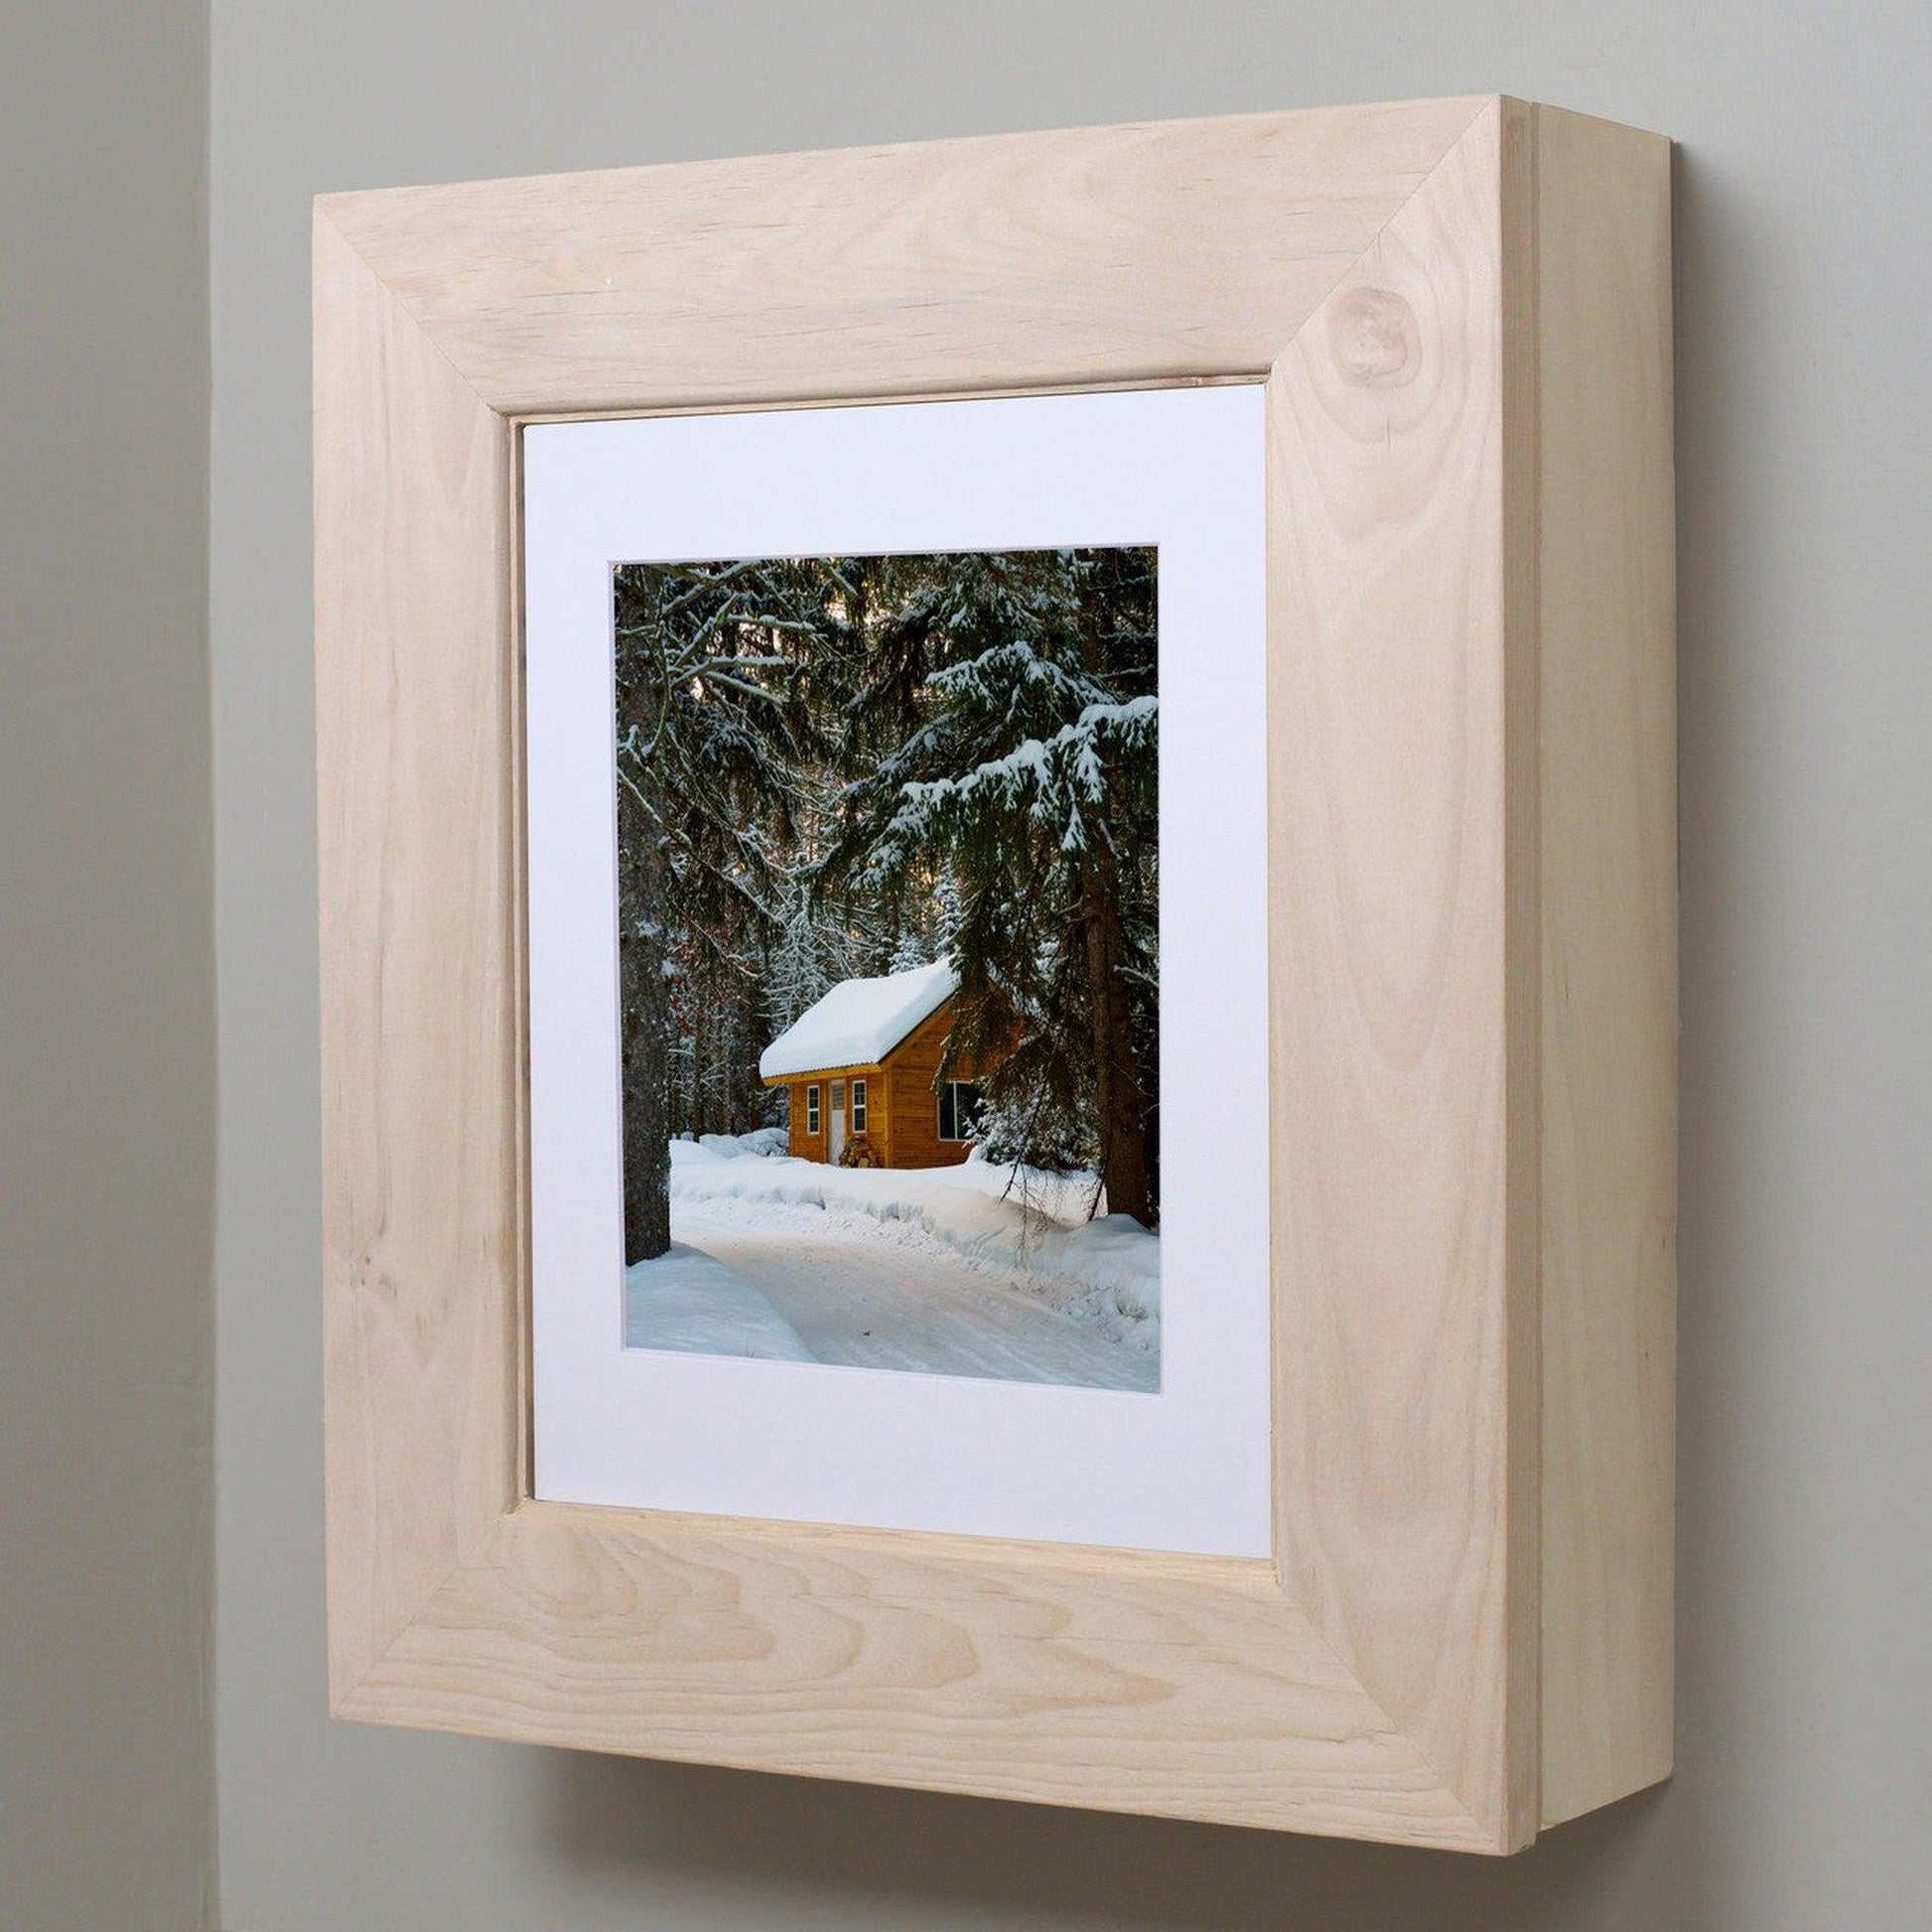 Fox Hollow Furnishings 20" x 17" Unfinished Wall Mount Flat Picture Frame Medicine Cabinet With White 8" x 10" Matting